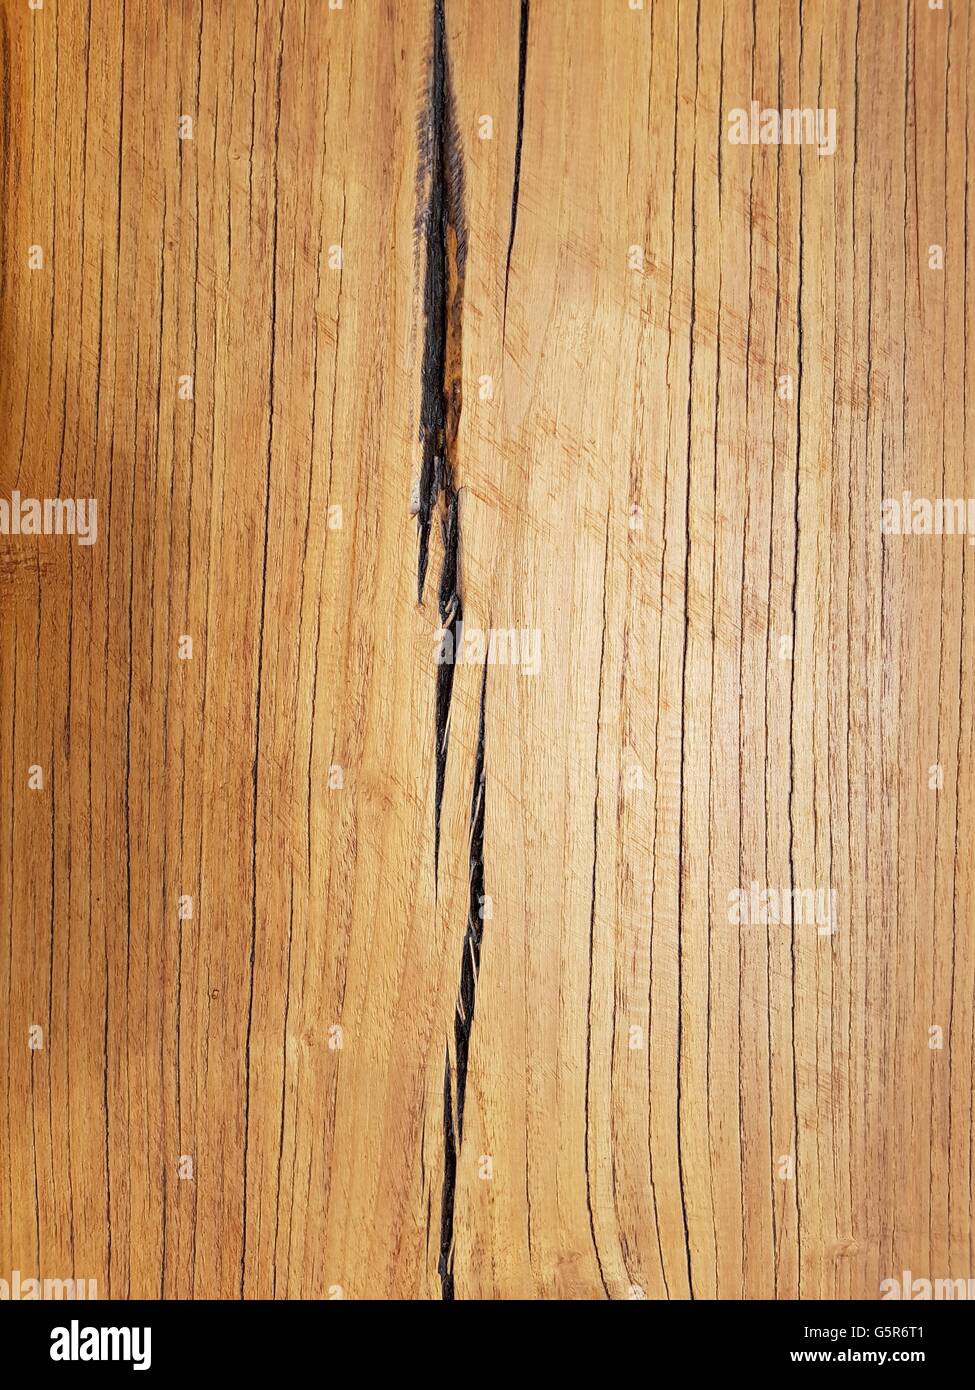 Weathered Wood grain avec fissures background Banque D'Images